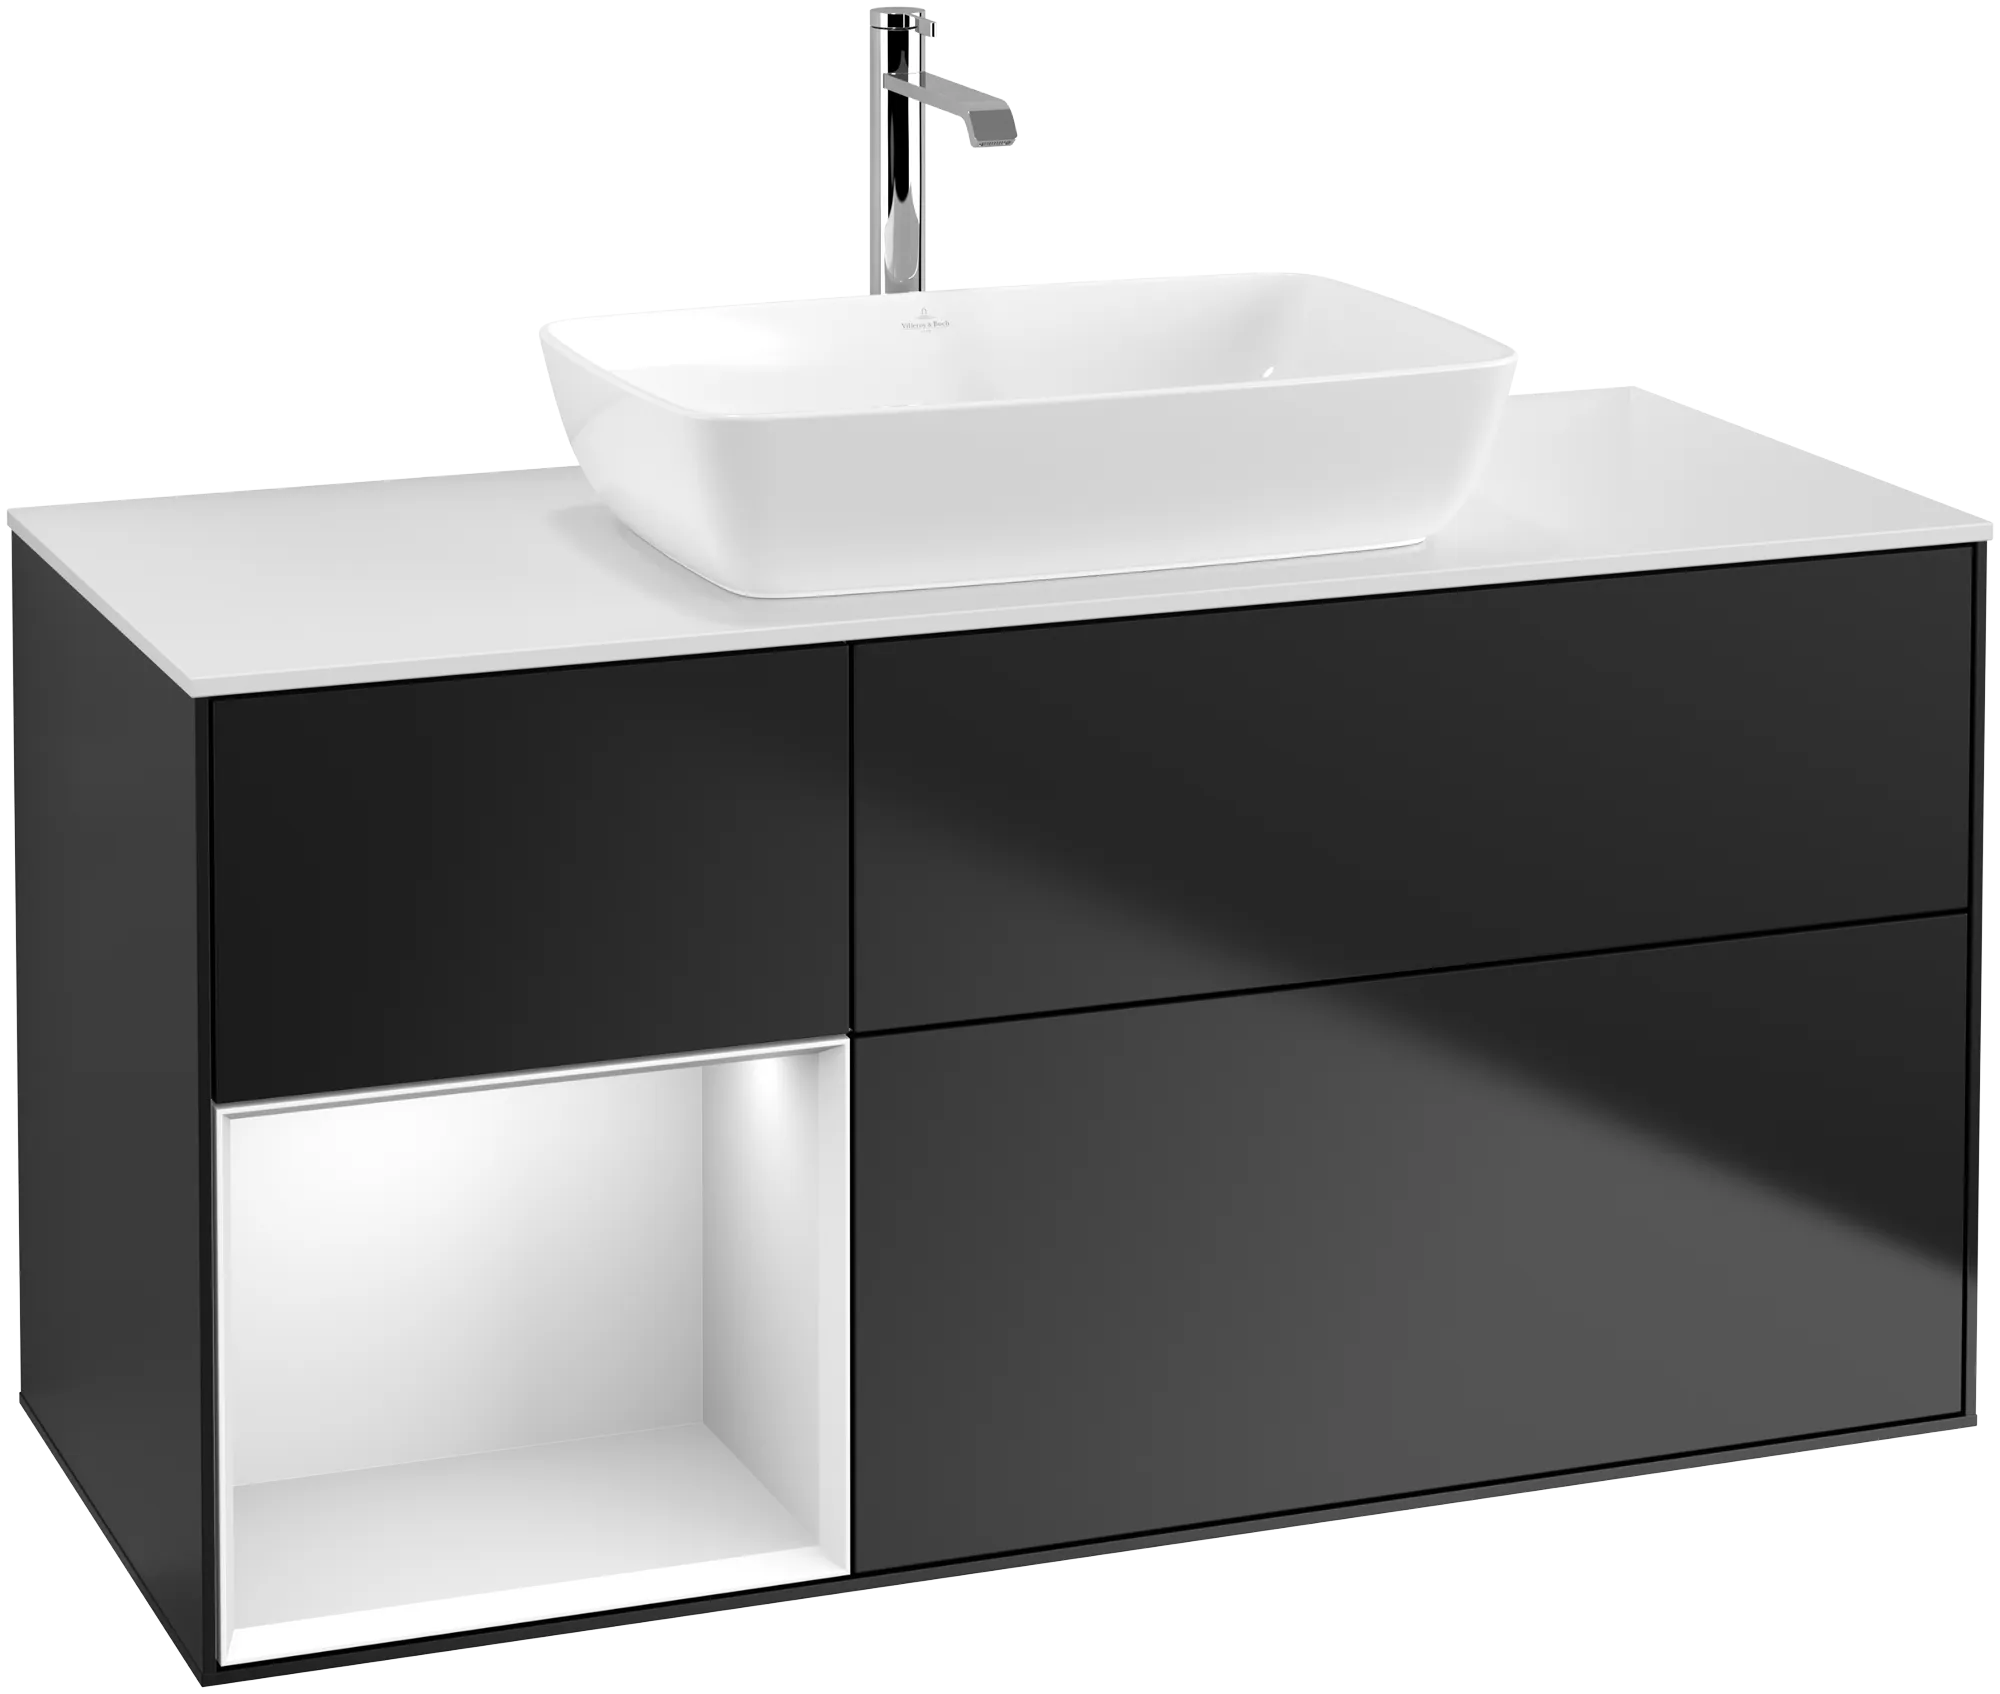 VILLEROY BOCH Finion Vanity unit, with lighting, 3 pull-out compartments, 1200 x 603 x 501 mm, Black Matt Lacquer / White Matt Lacquer / Glass White Matt #G821MTPD resmi